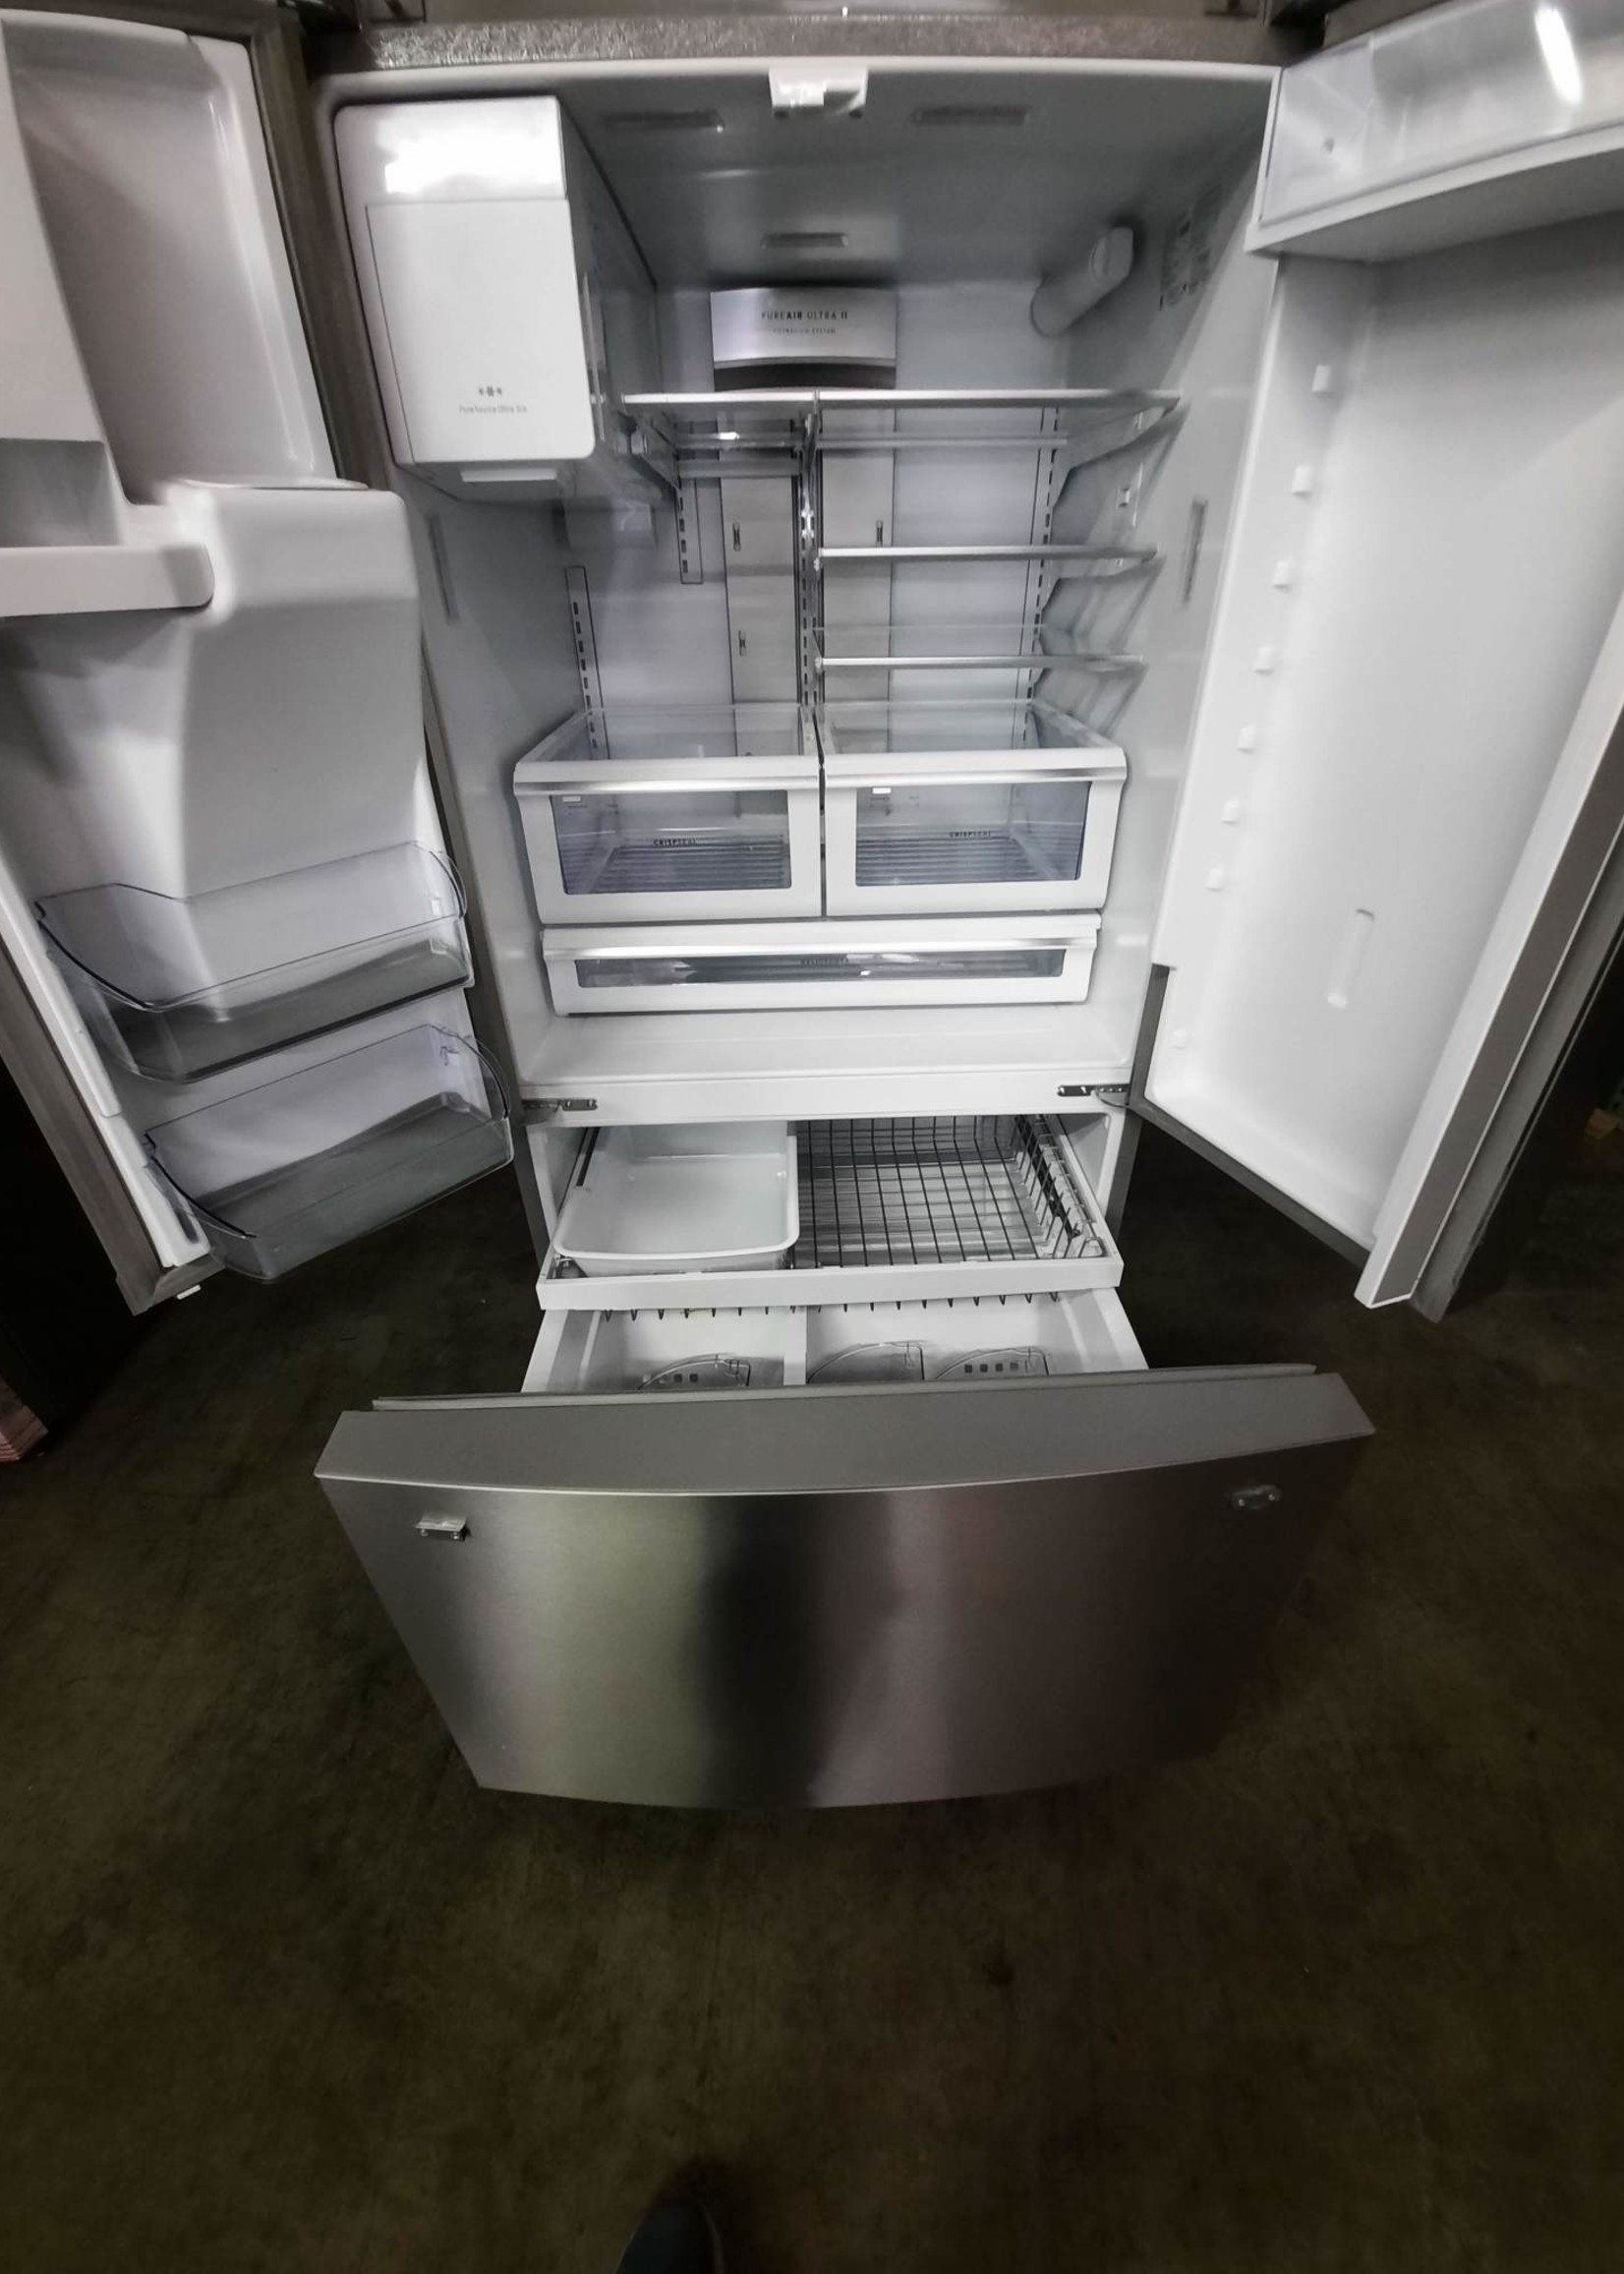 Frigidaire *Frigidaire  LGHB2869TF  Gallery 26.8-cu ft French Door Refrigerator with Dual Ice Maker (Smudge-Proof Stainless Steel) ENERGY STAR